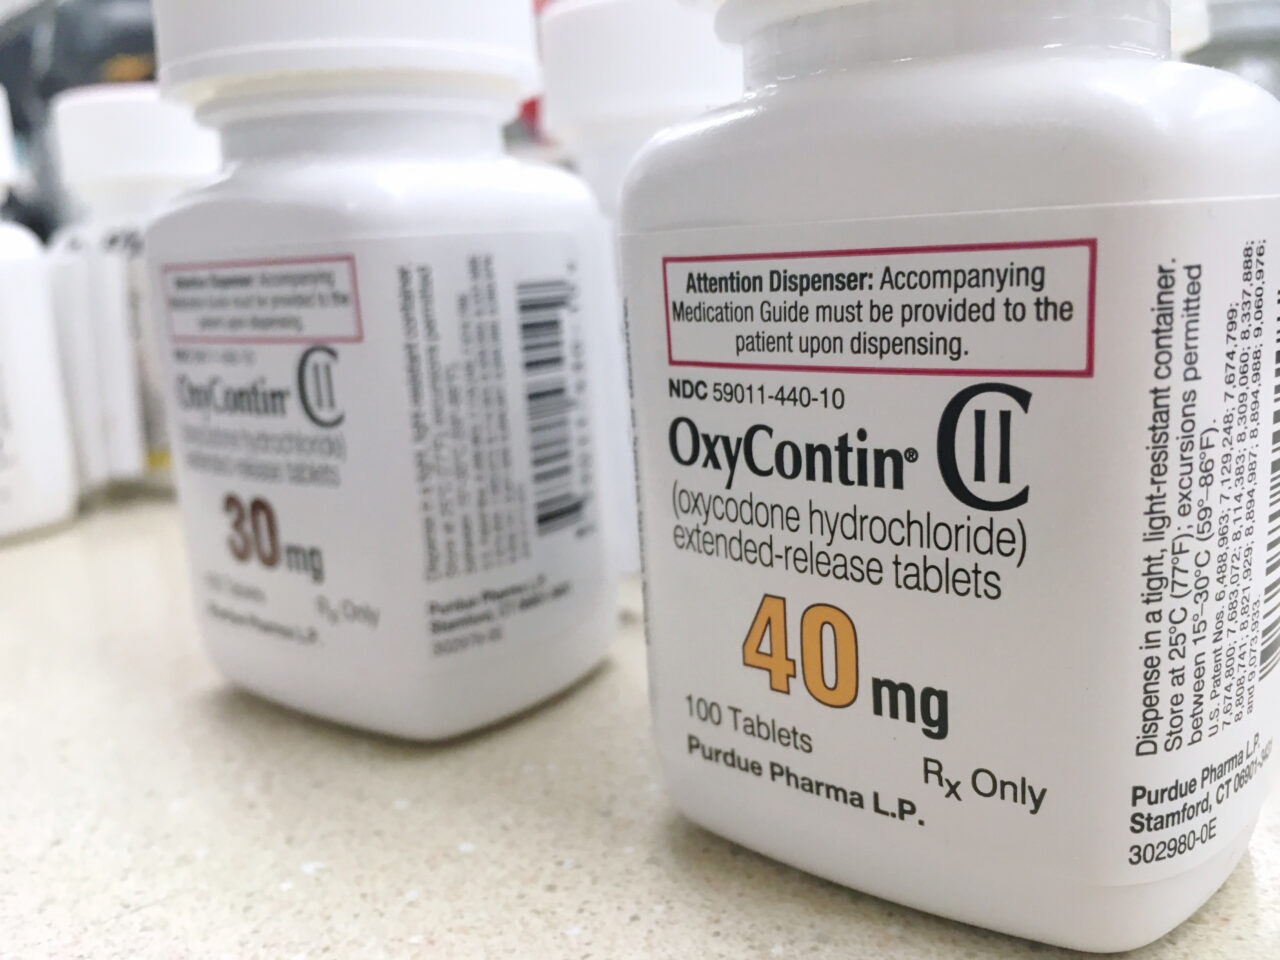 Owners of OxyContin Maker Paid $19M to Institution That Advises Opioid Policy